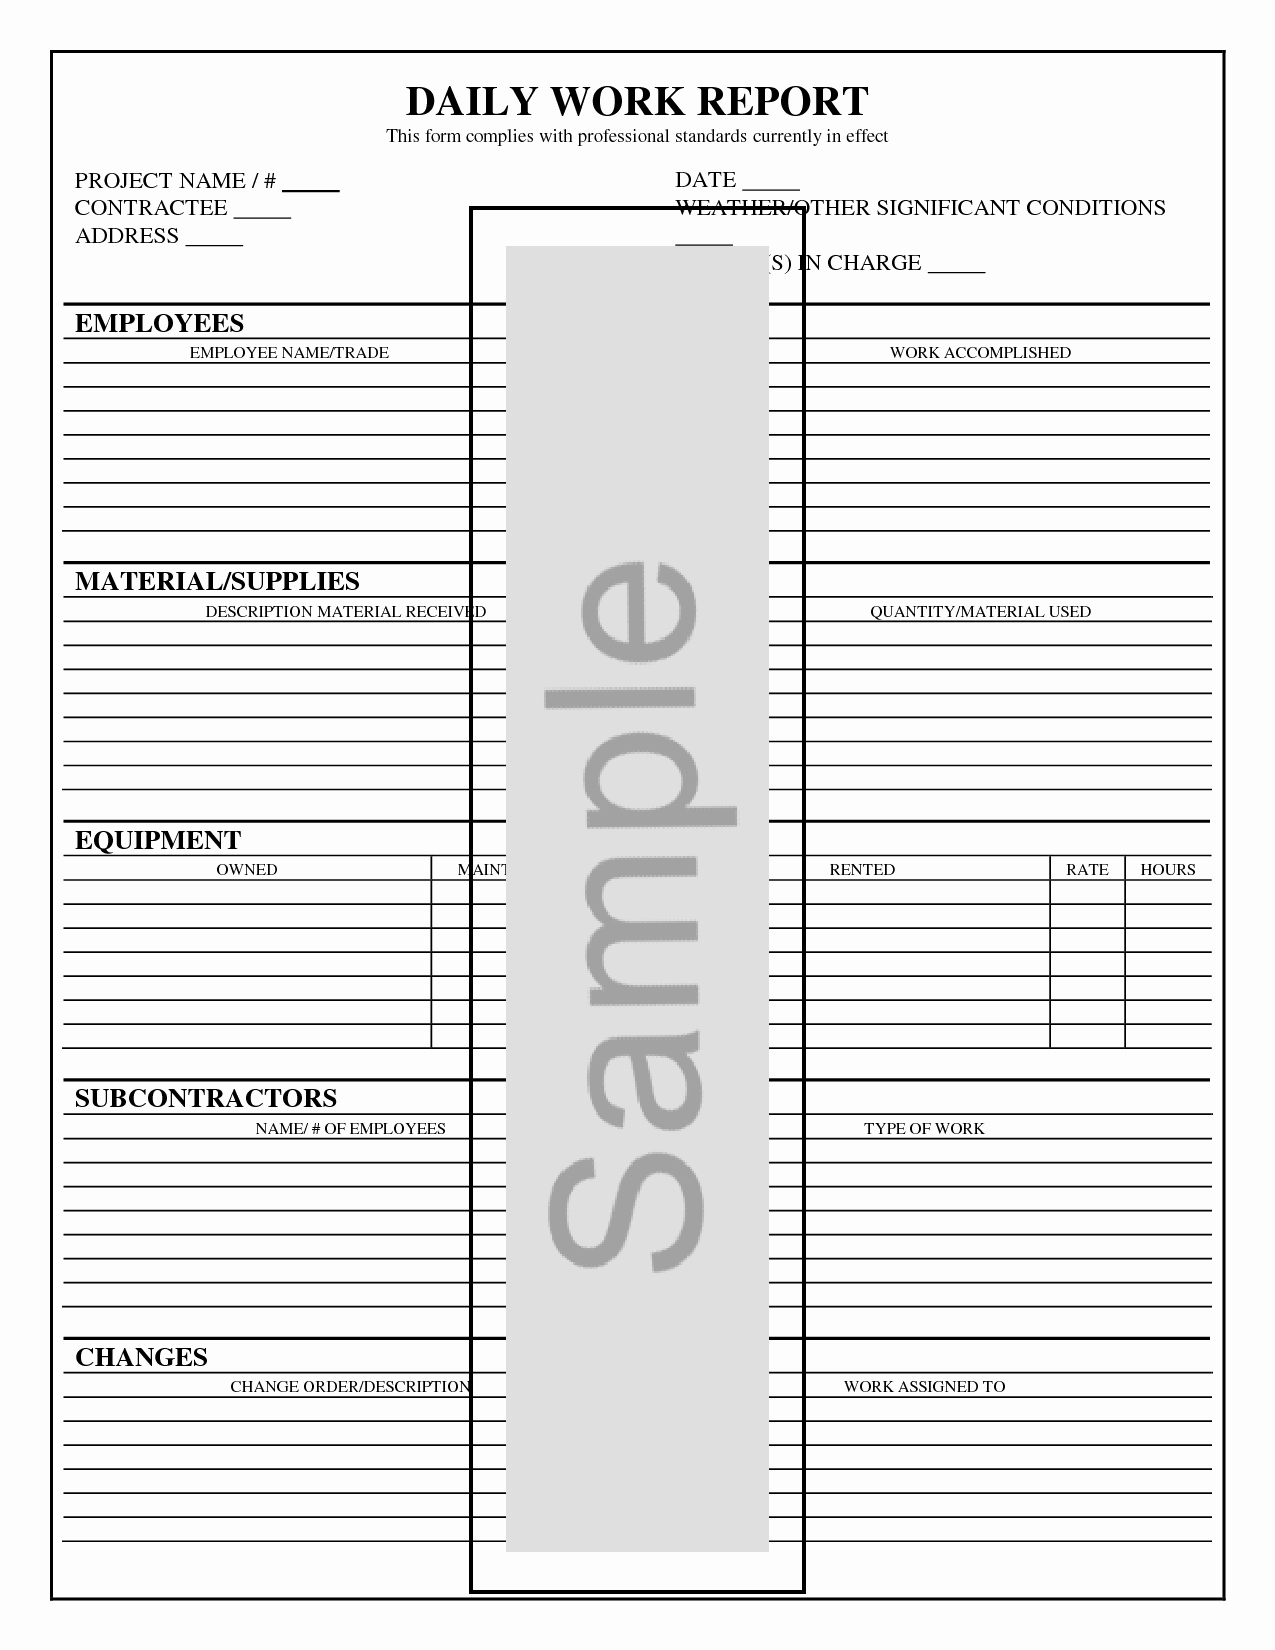 Daily Work Report Template Awesome Best S Of Daily Work Progress Report Template Daily